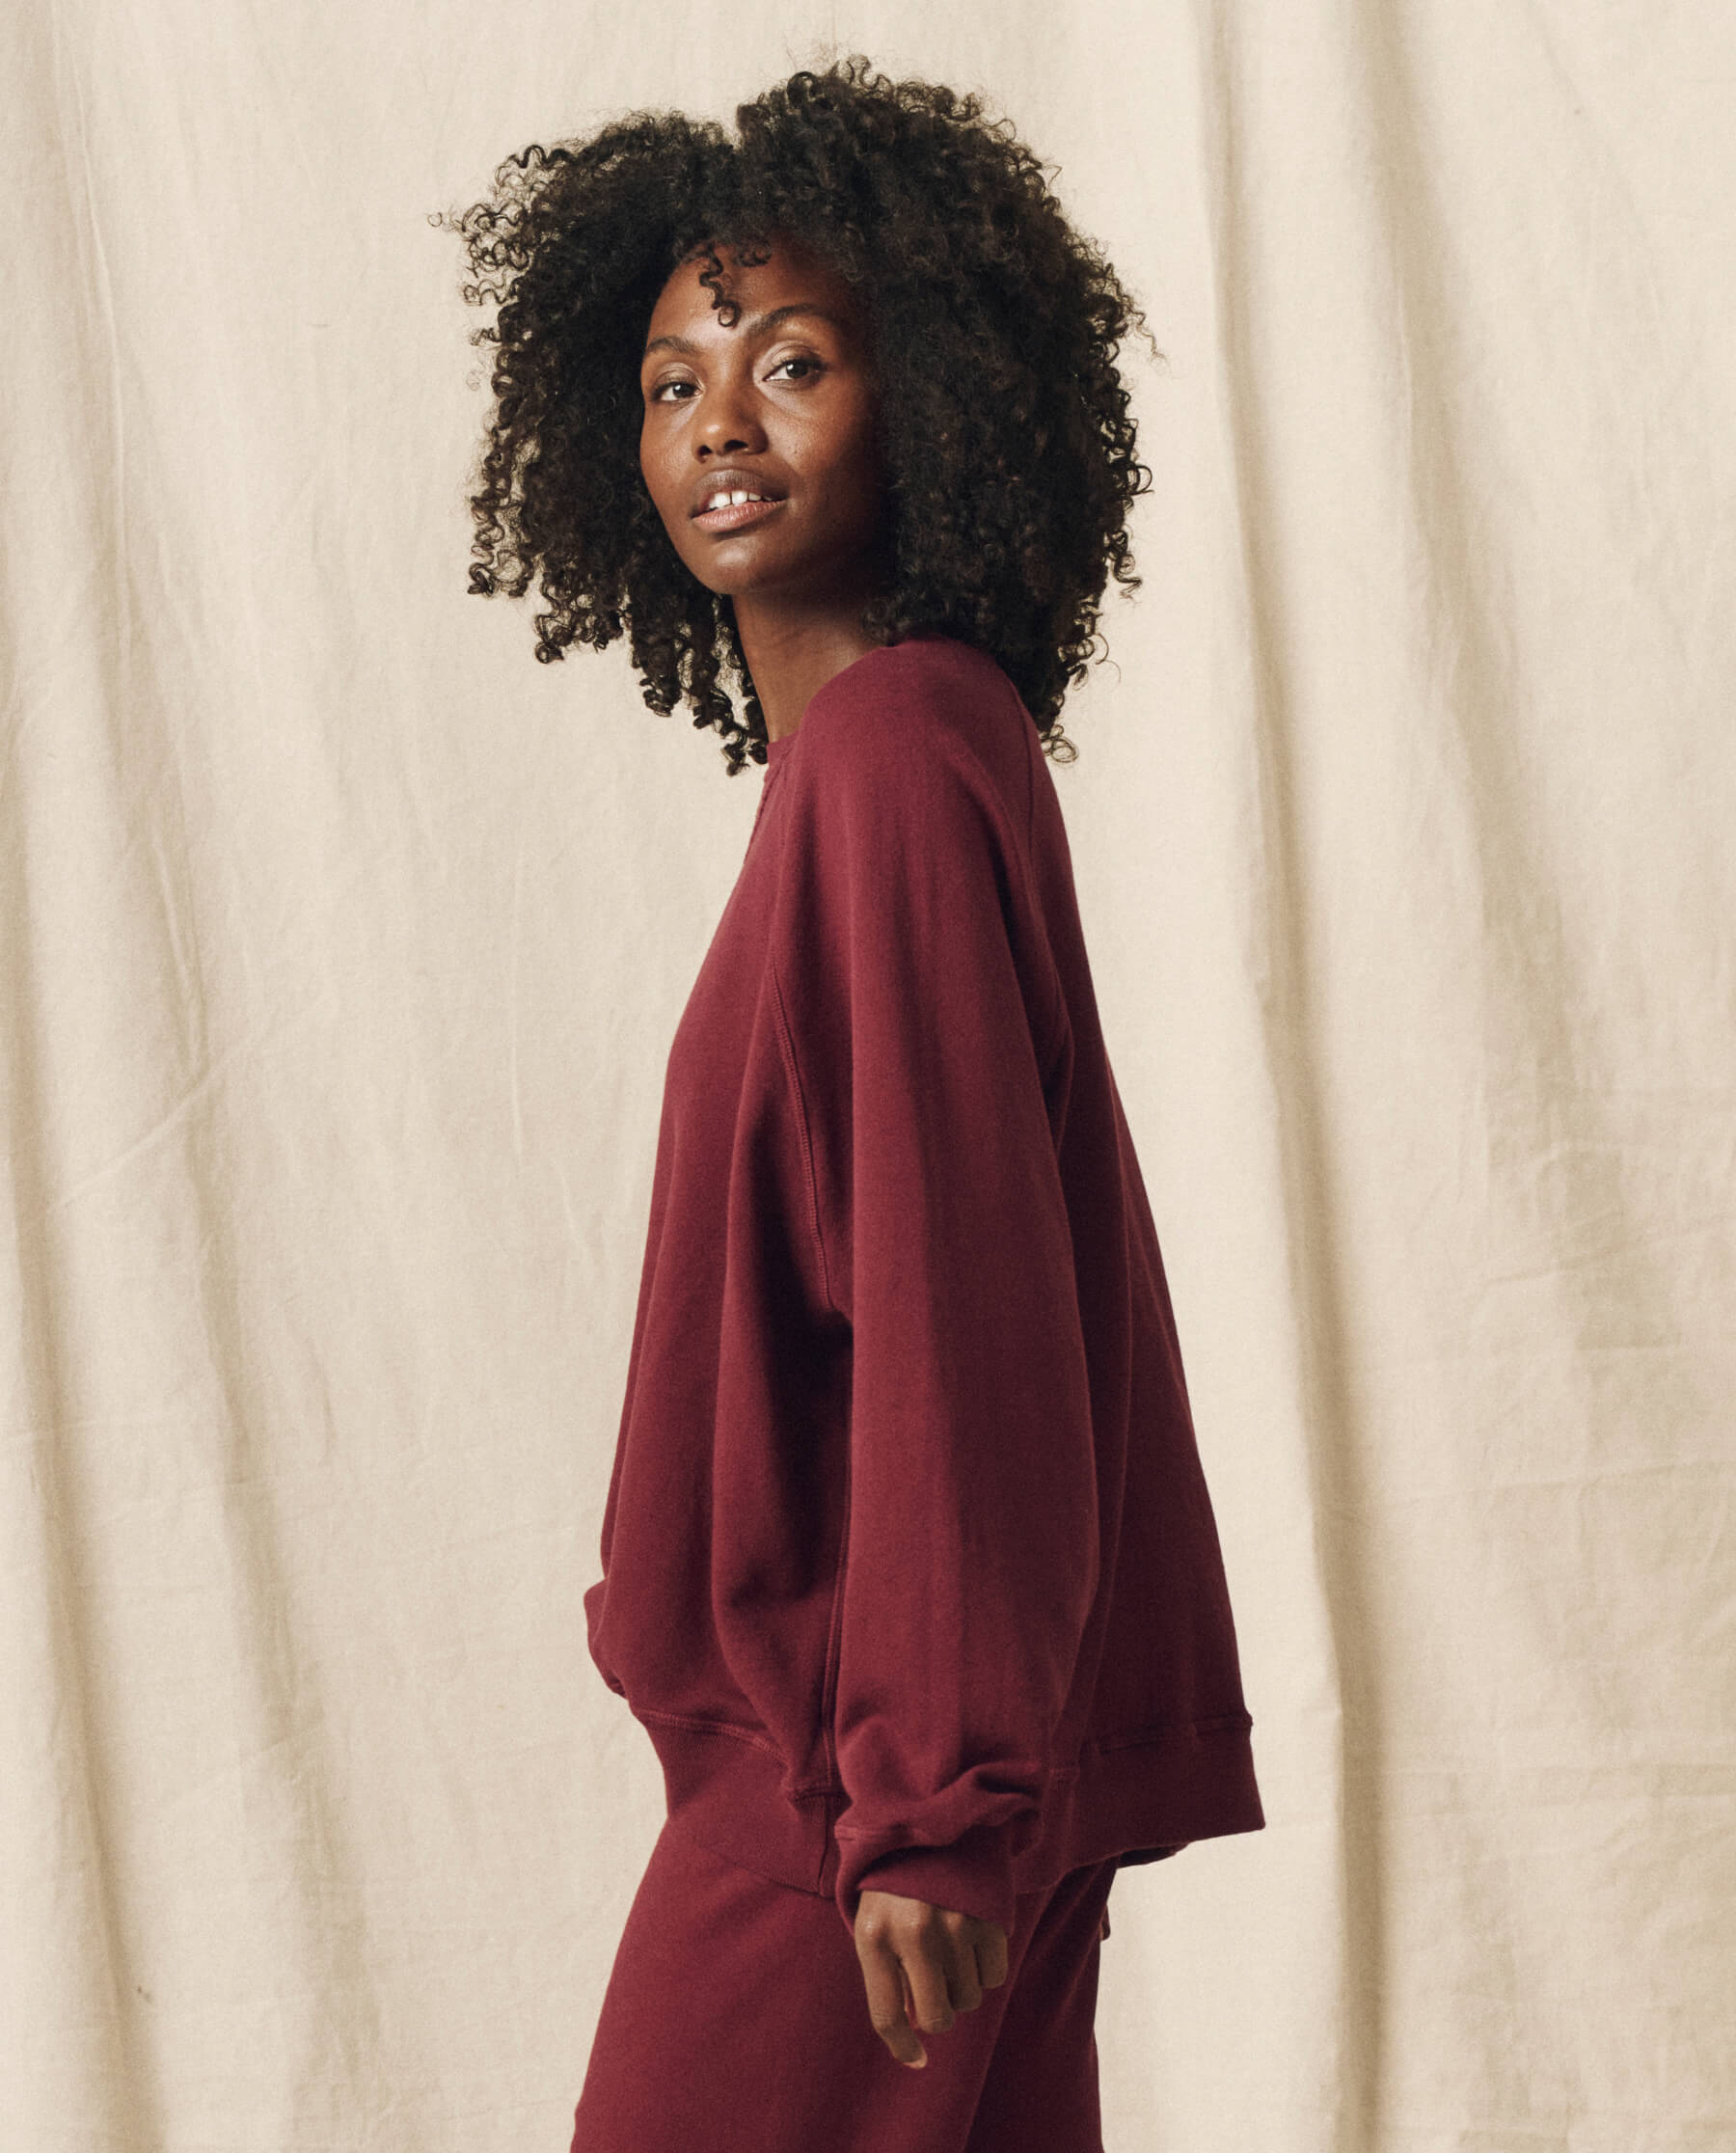 The Slouch Sweatshirt. Solid -- Mulled Wine SWEATSHIRTS THE GREAT. HOL 23 KNITS